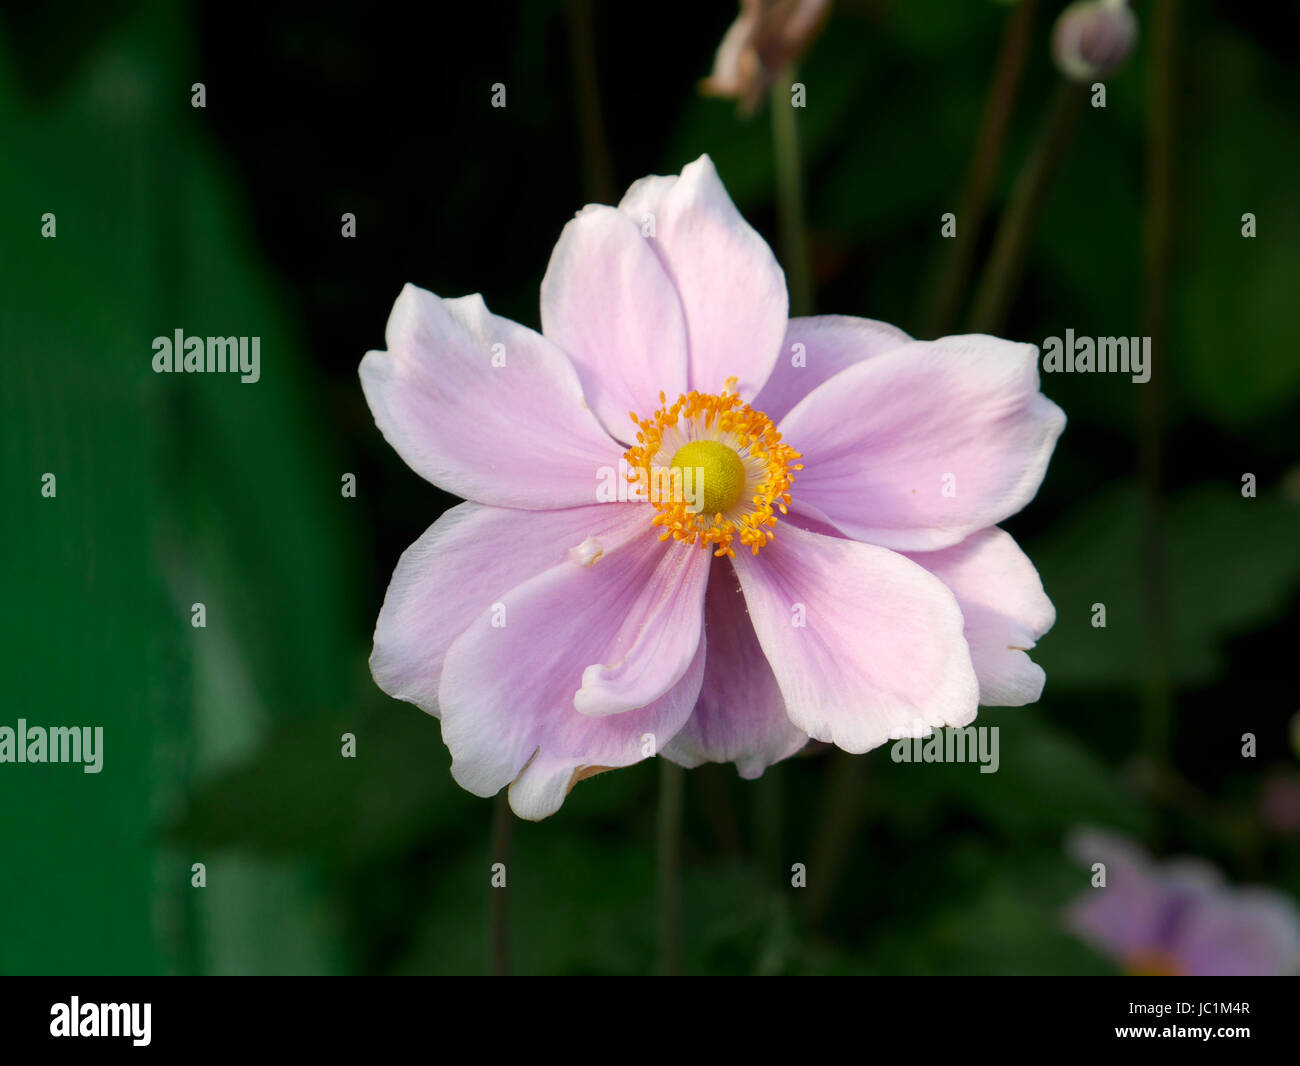 Flower of anemone japonica. Suzanne's vegetable garden, Le Pas, Mayenne, France. Stock Photo